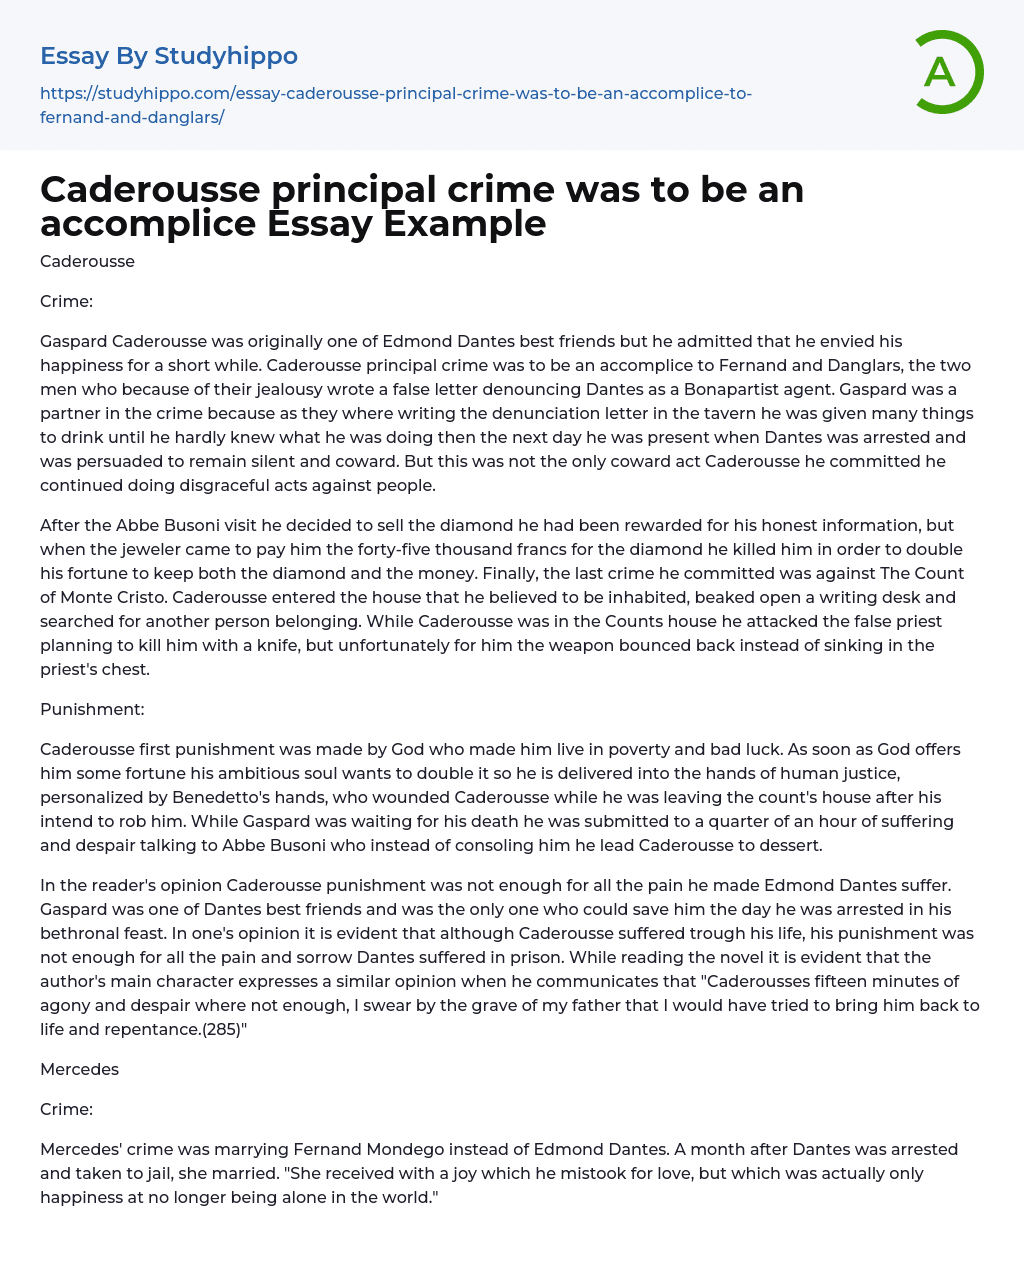 Caderousse principal crime was to be an accomplice Essay Example